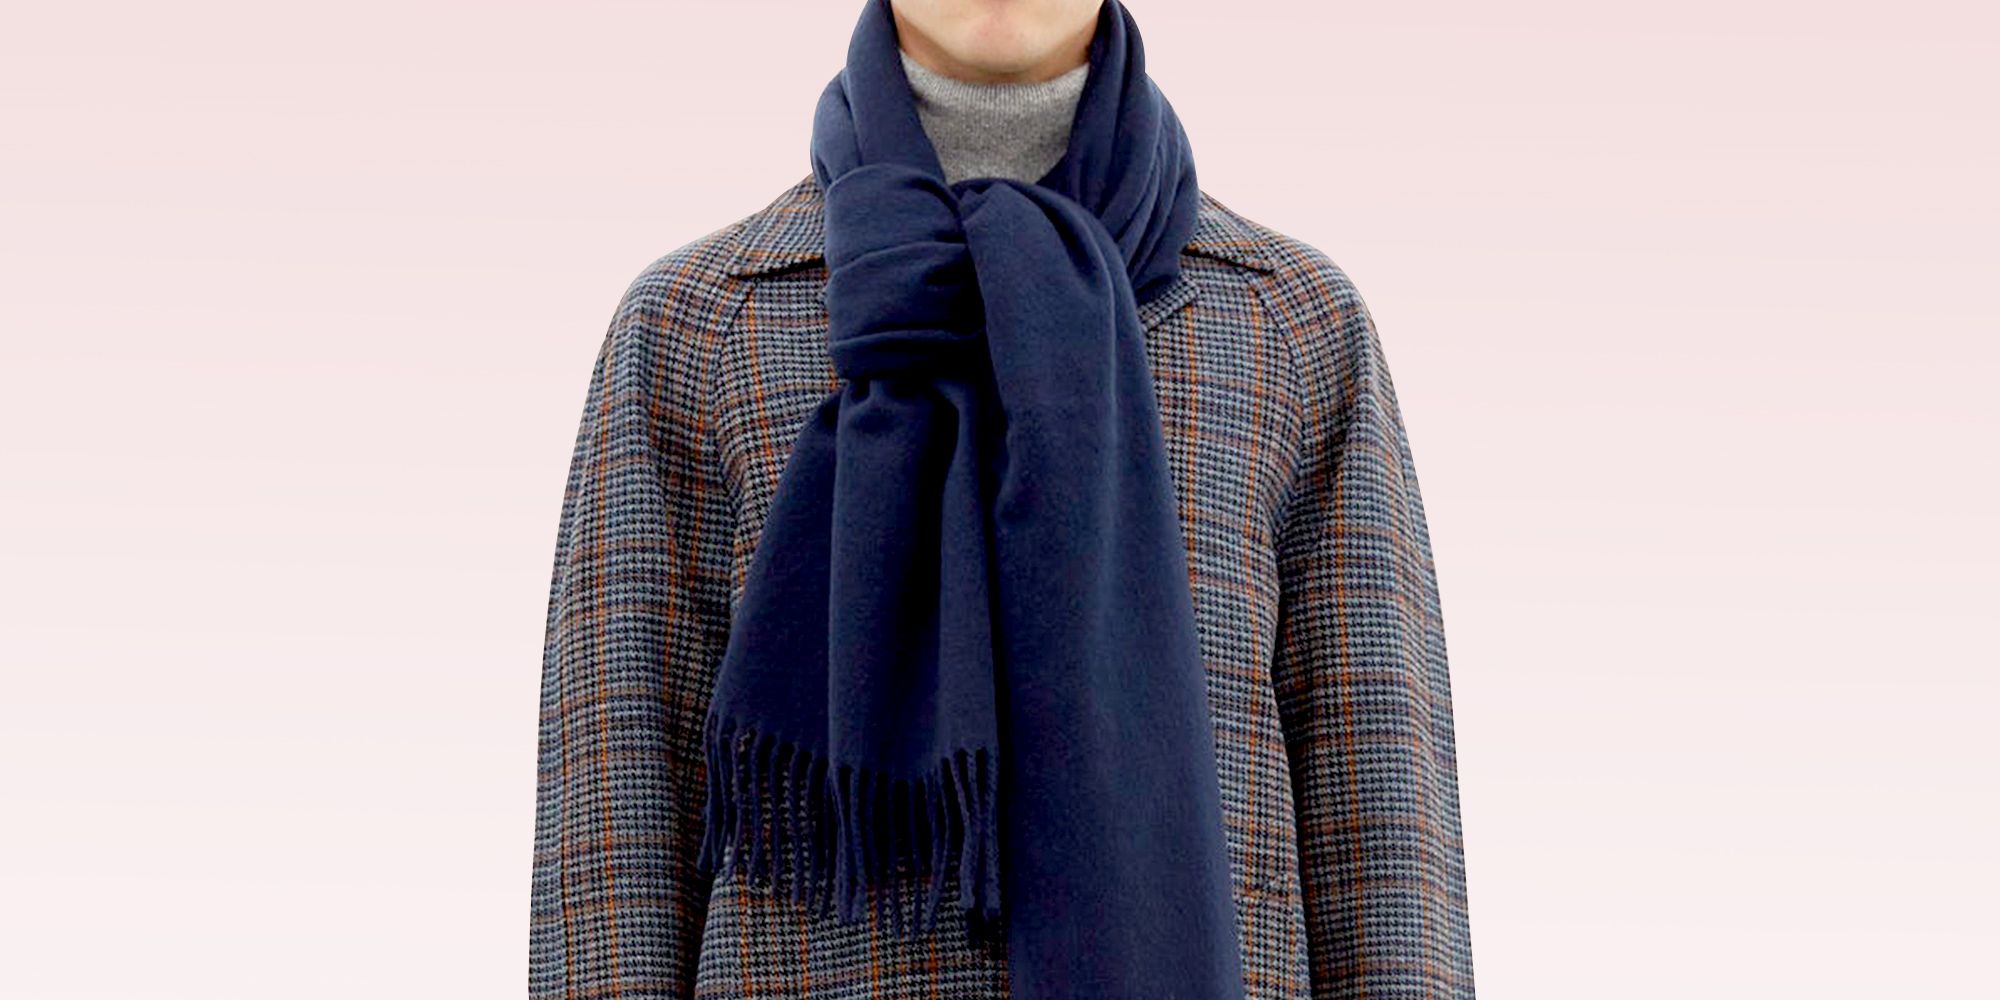 Mens Winter Warm Cashmere Scarf,Fashion Lightweight and Soft Scarves